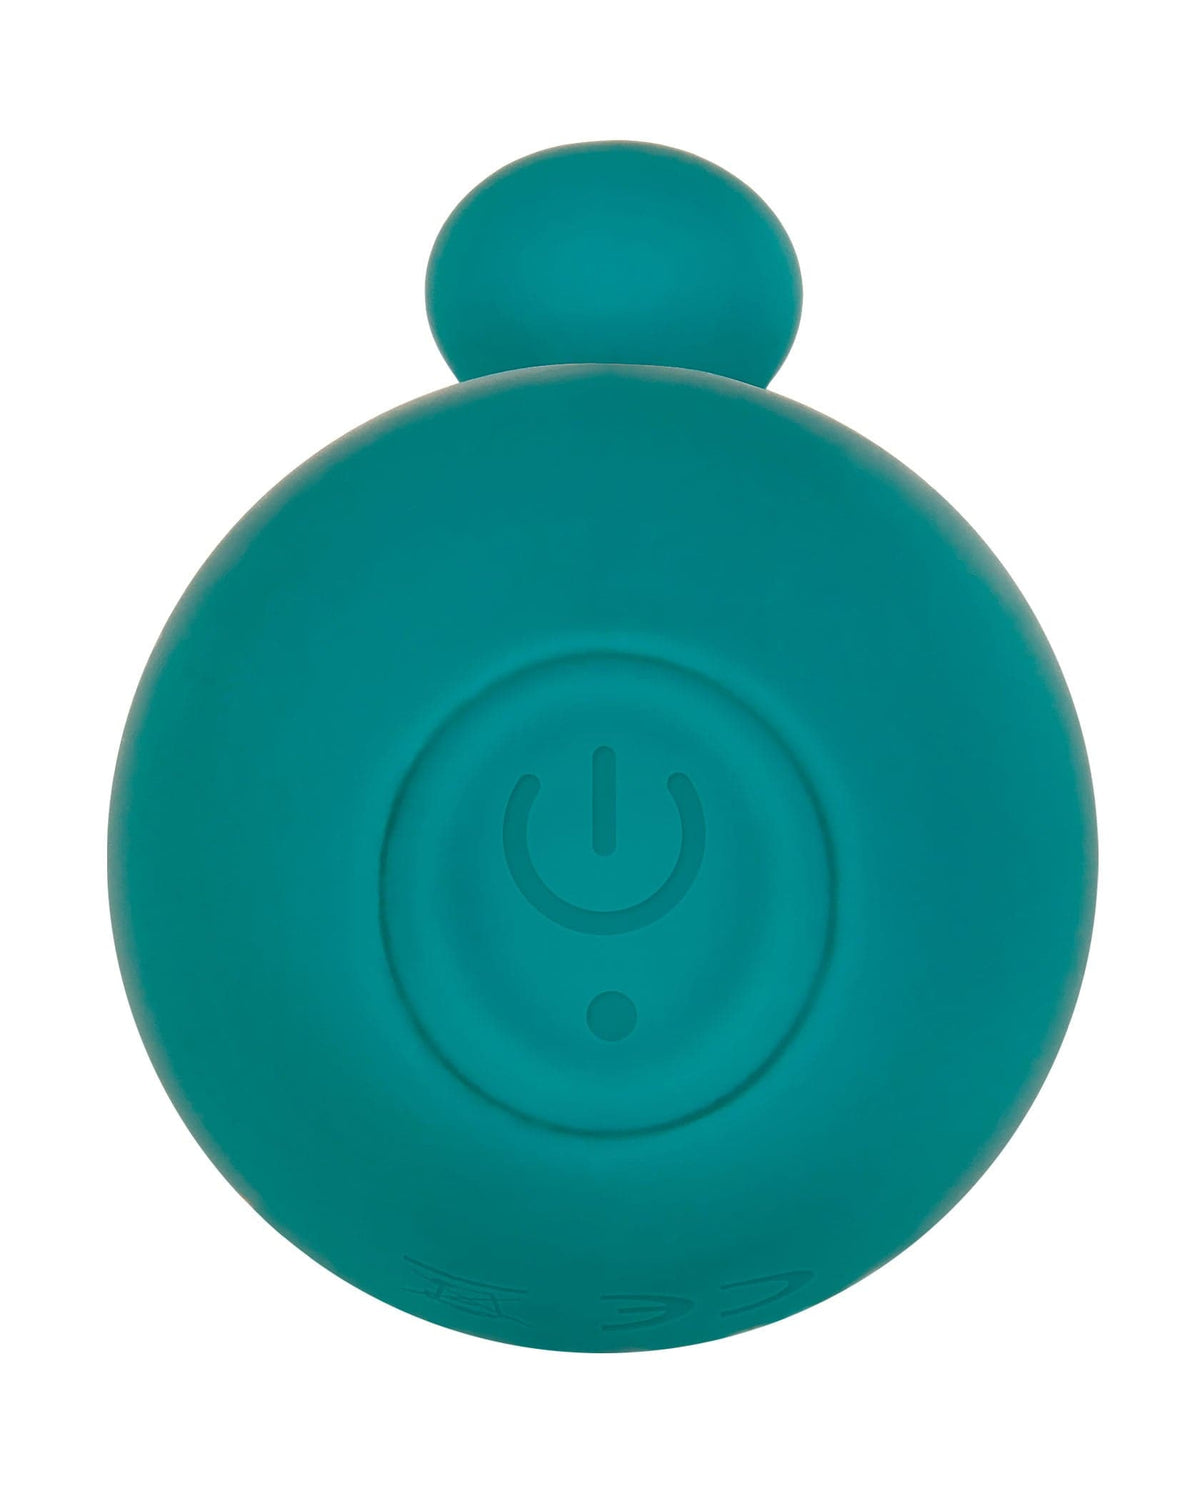 g spot perfection teal